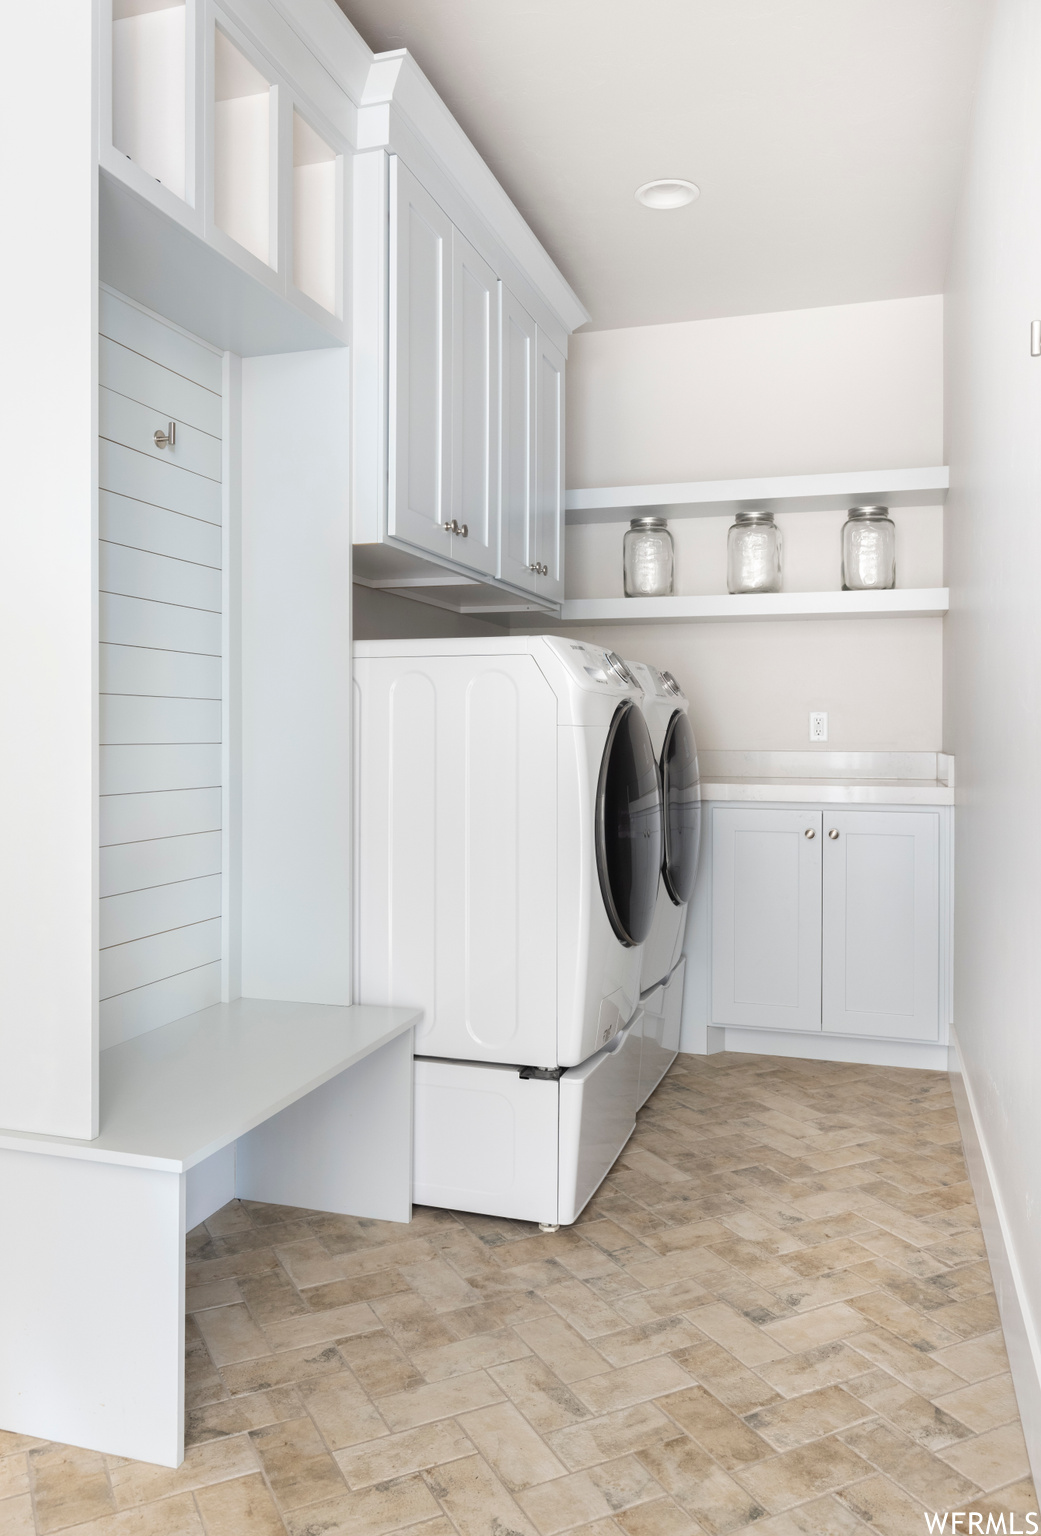 Laundry room featuring cabinets and washer and clothes dryer